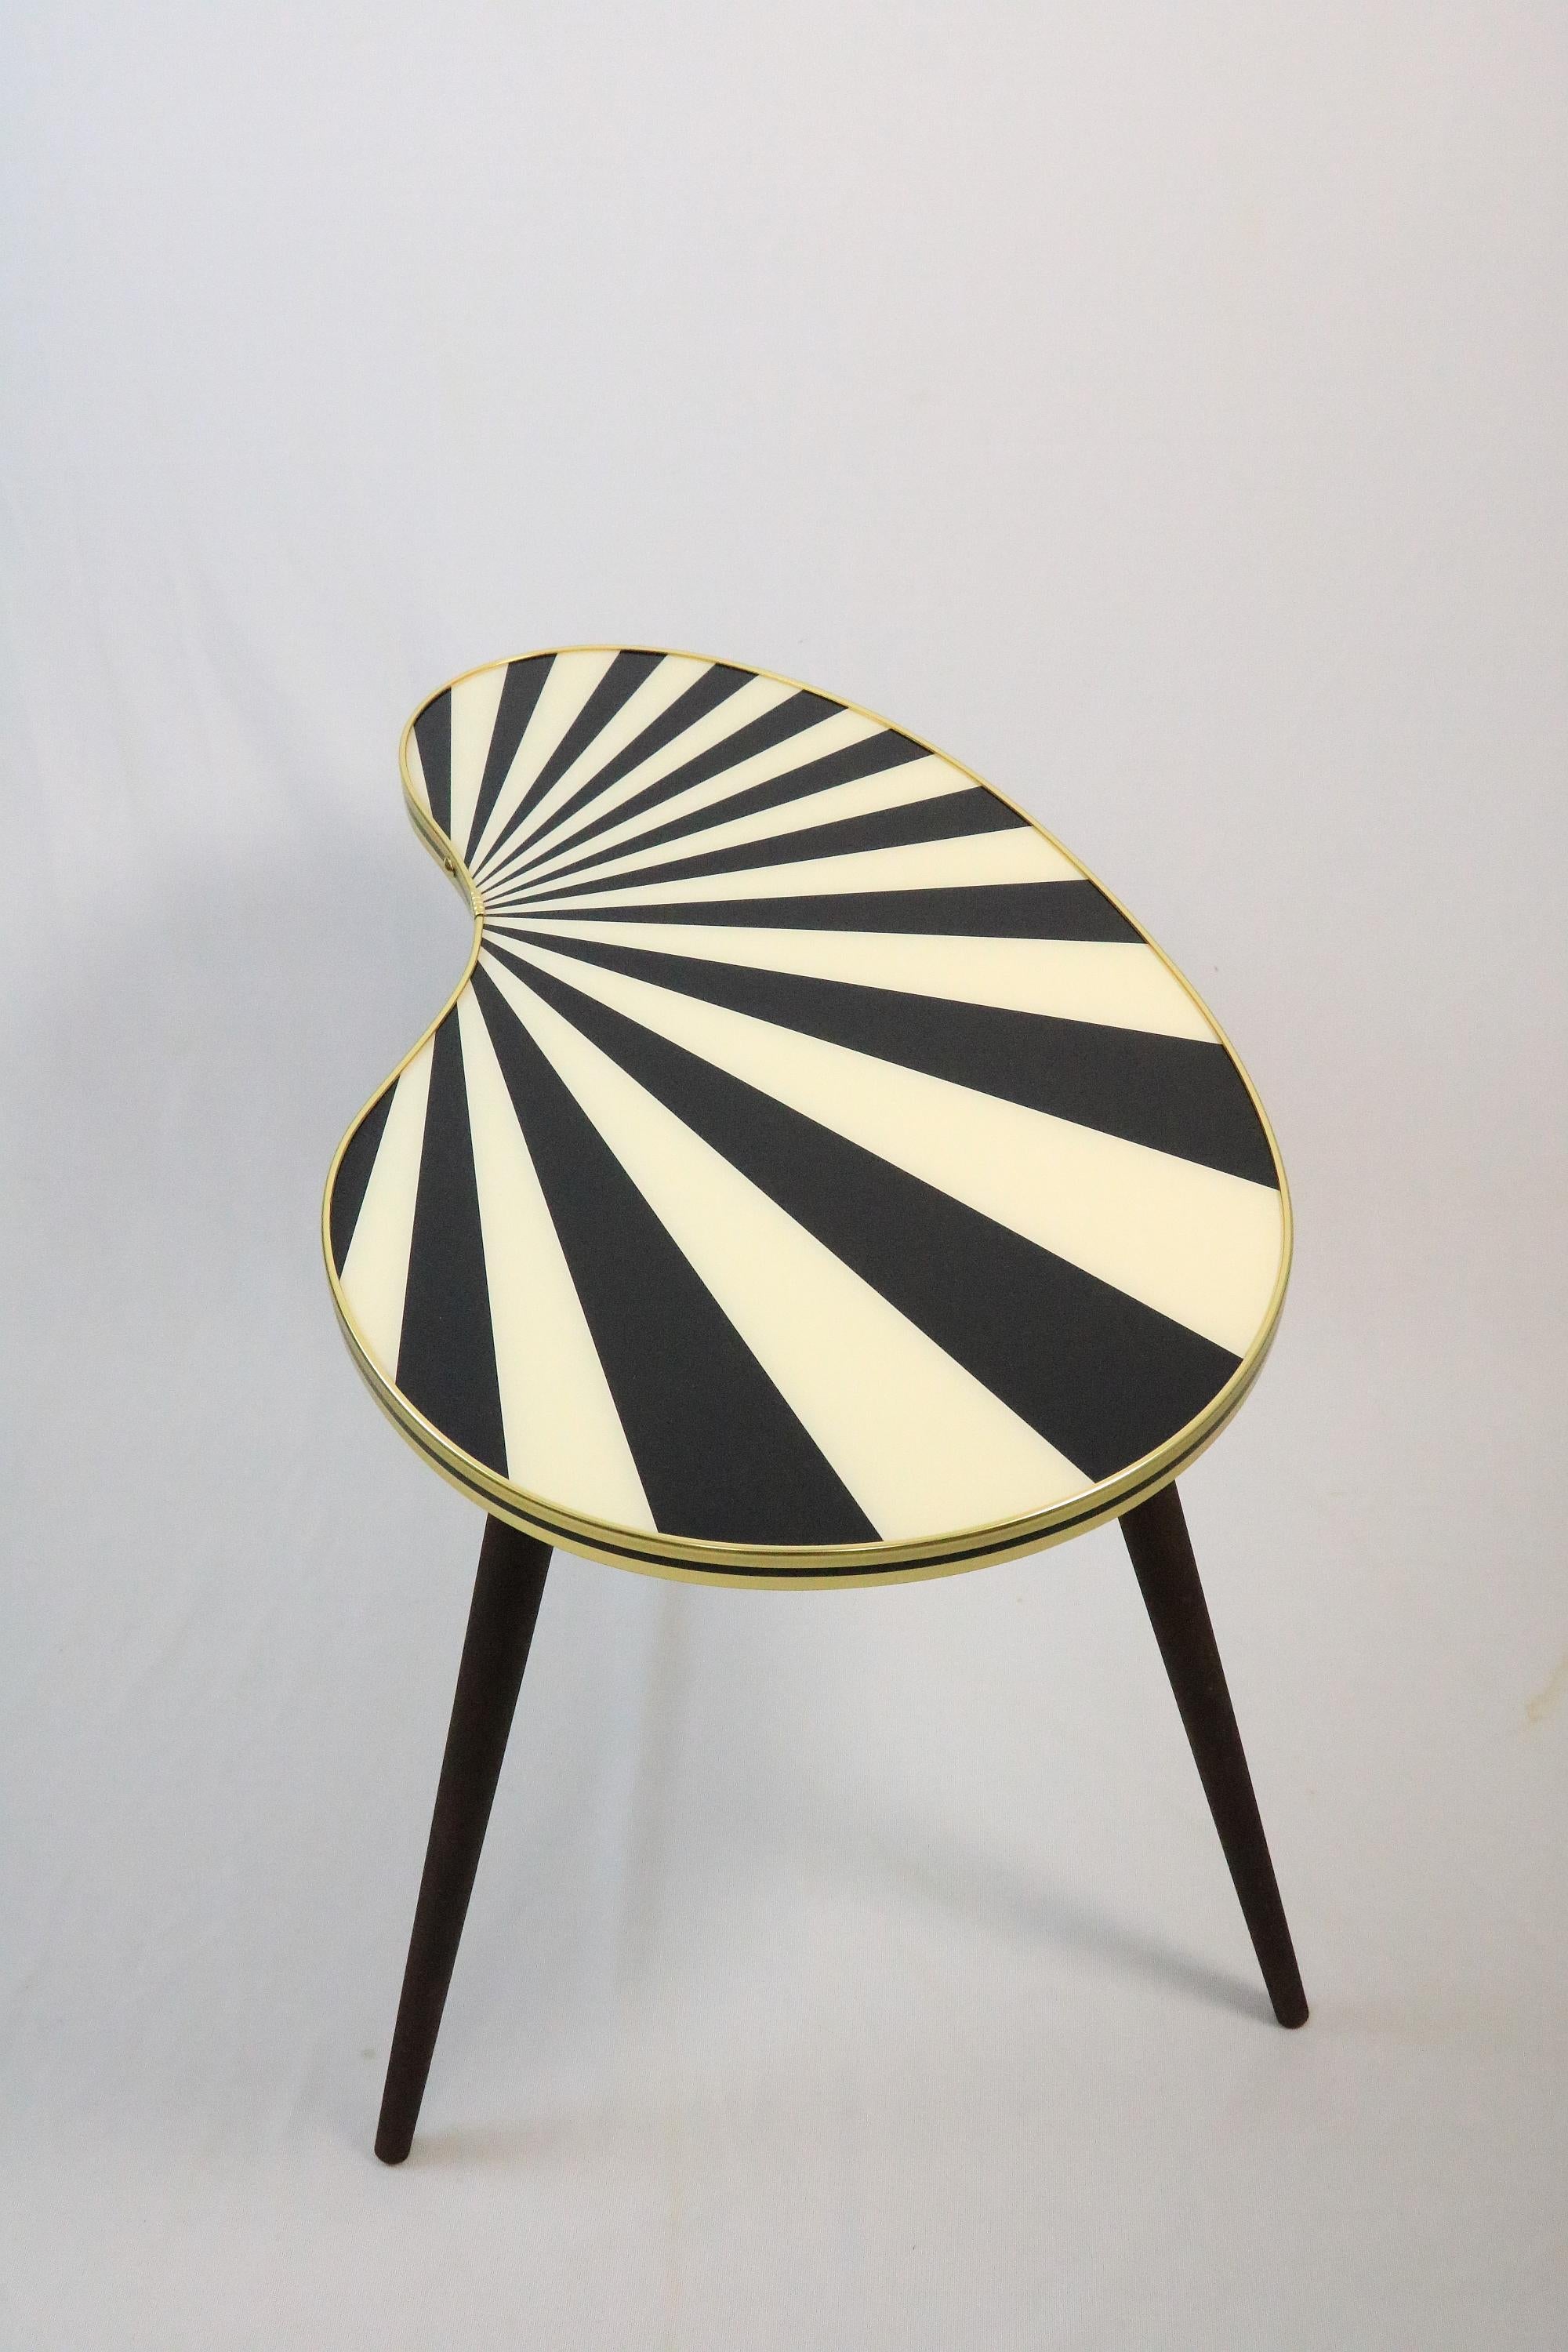 Exclusive offer of one large kidney shaped side table. 
Very decorative in black-white colored stripes.

These tables are a high-quality new production after original models of the 1950s.

PLEASE note dimensions:
Height: 43cm / 16.93 inch
Length: 60